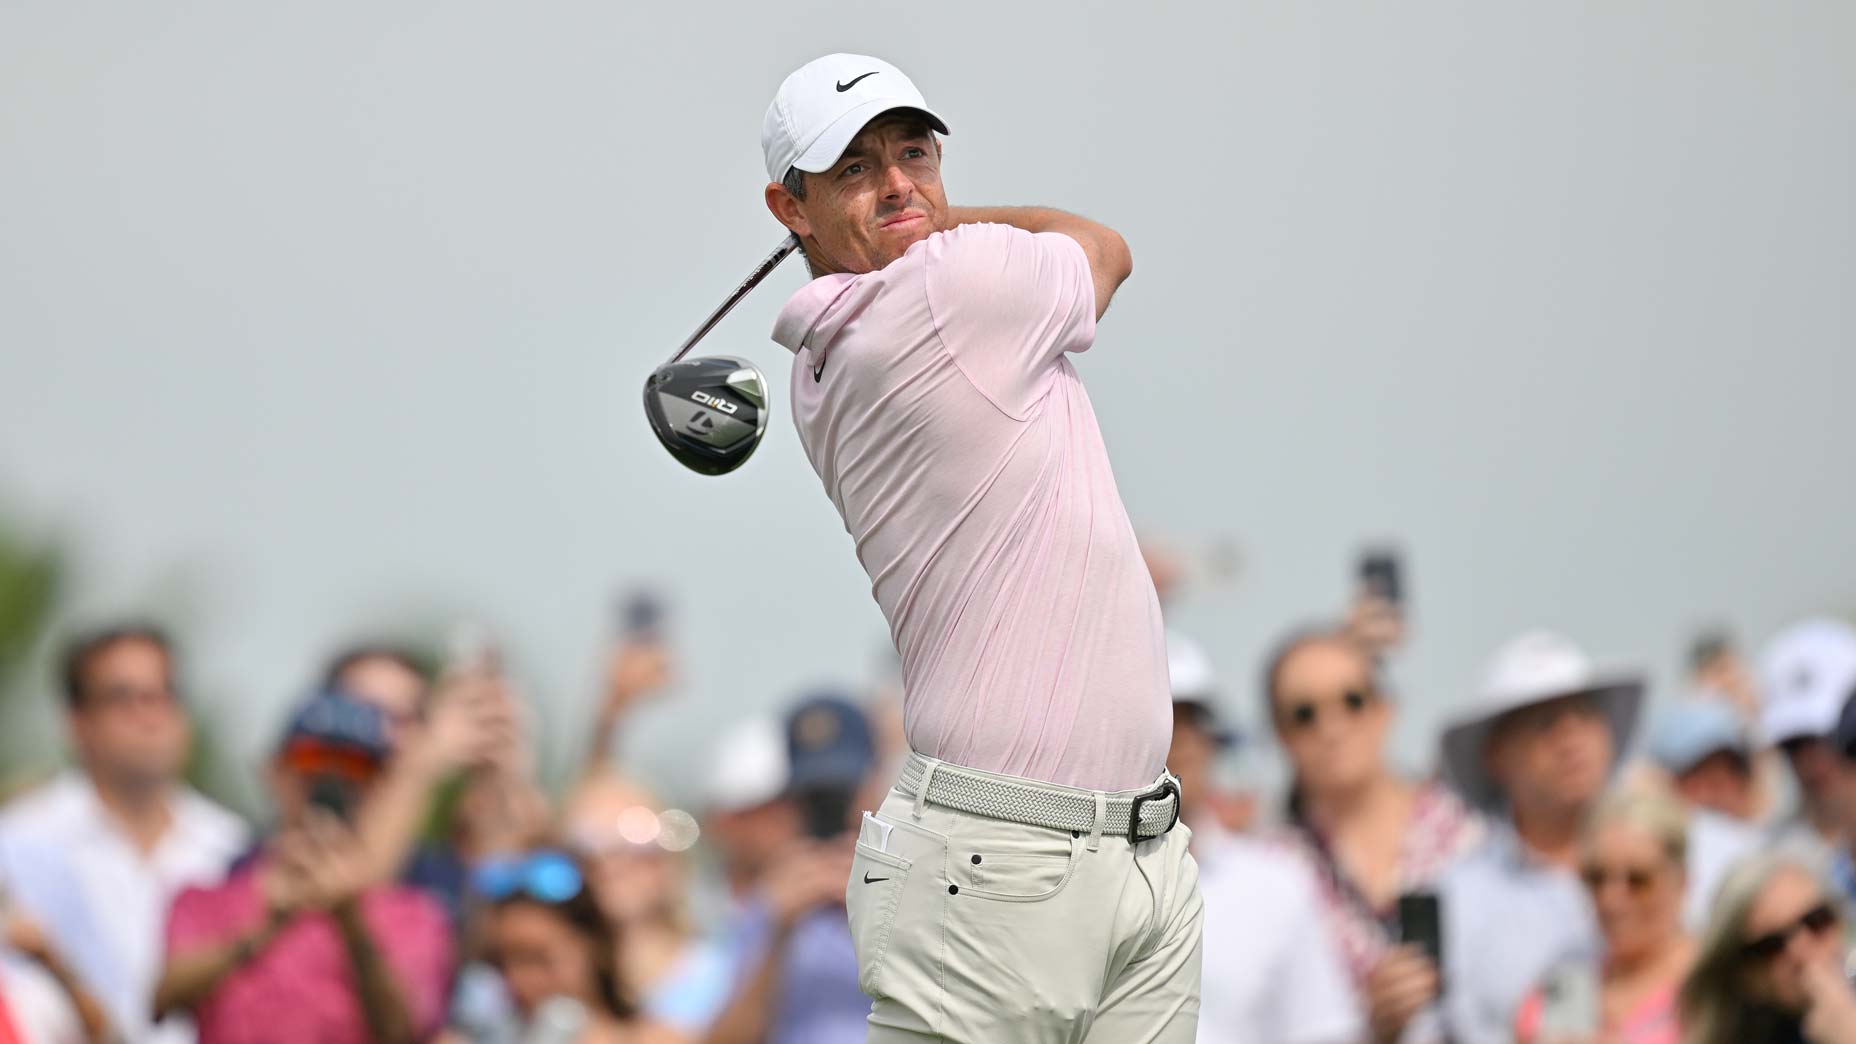 Rory McIlroy in pink shirt hits drive at 2024 Cognizant Classic